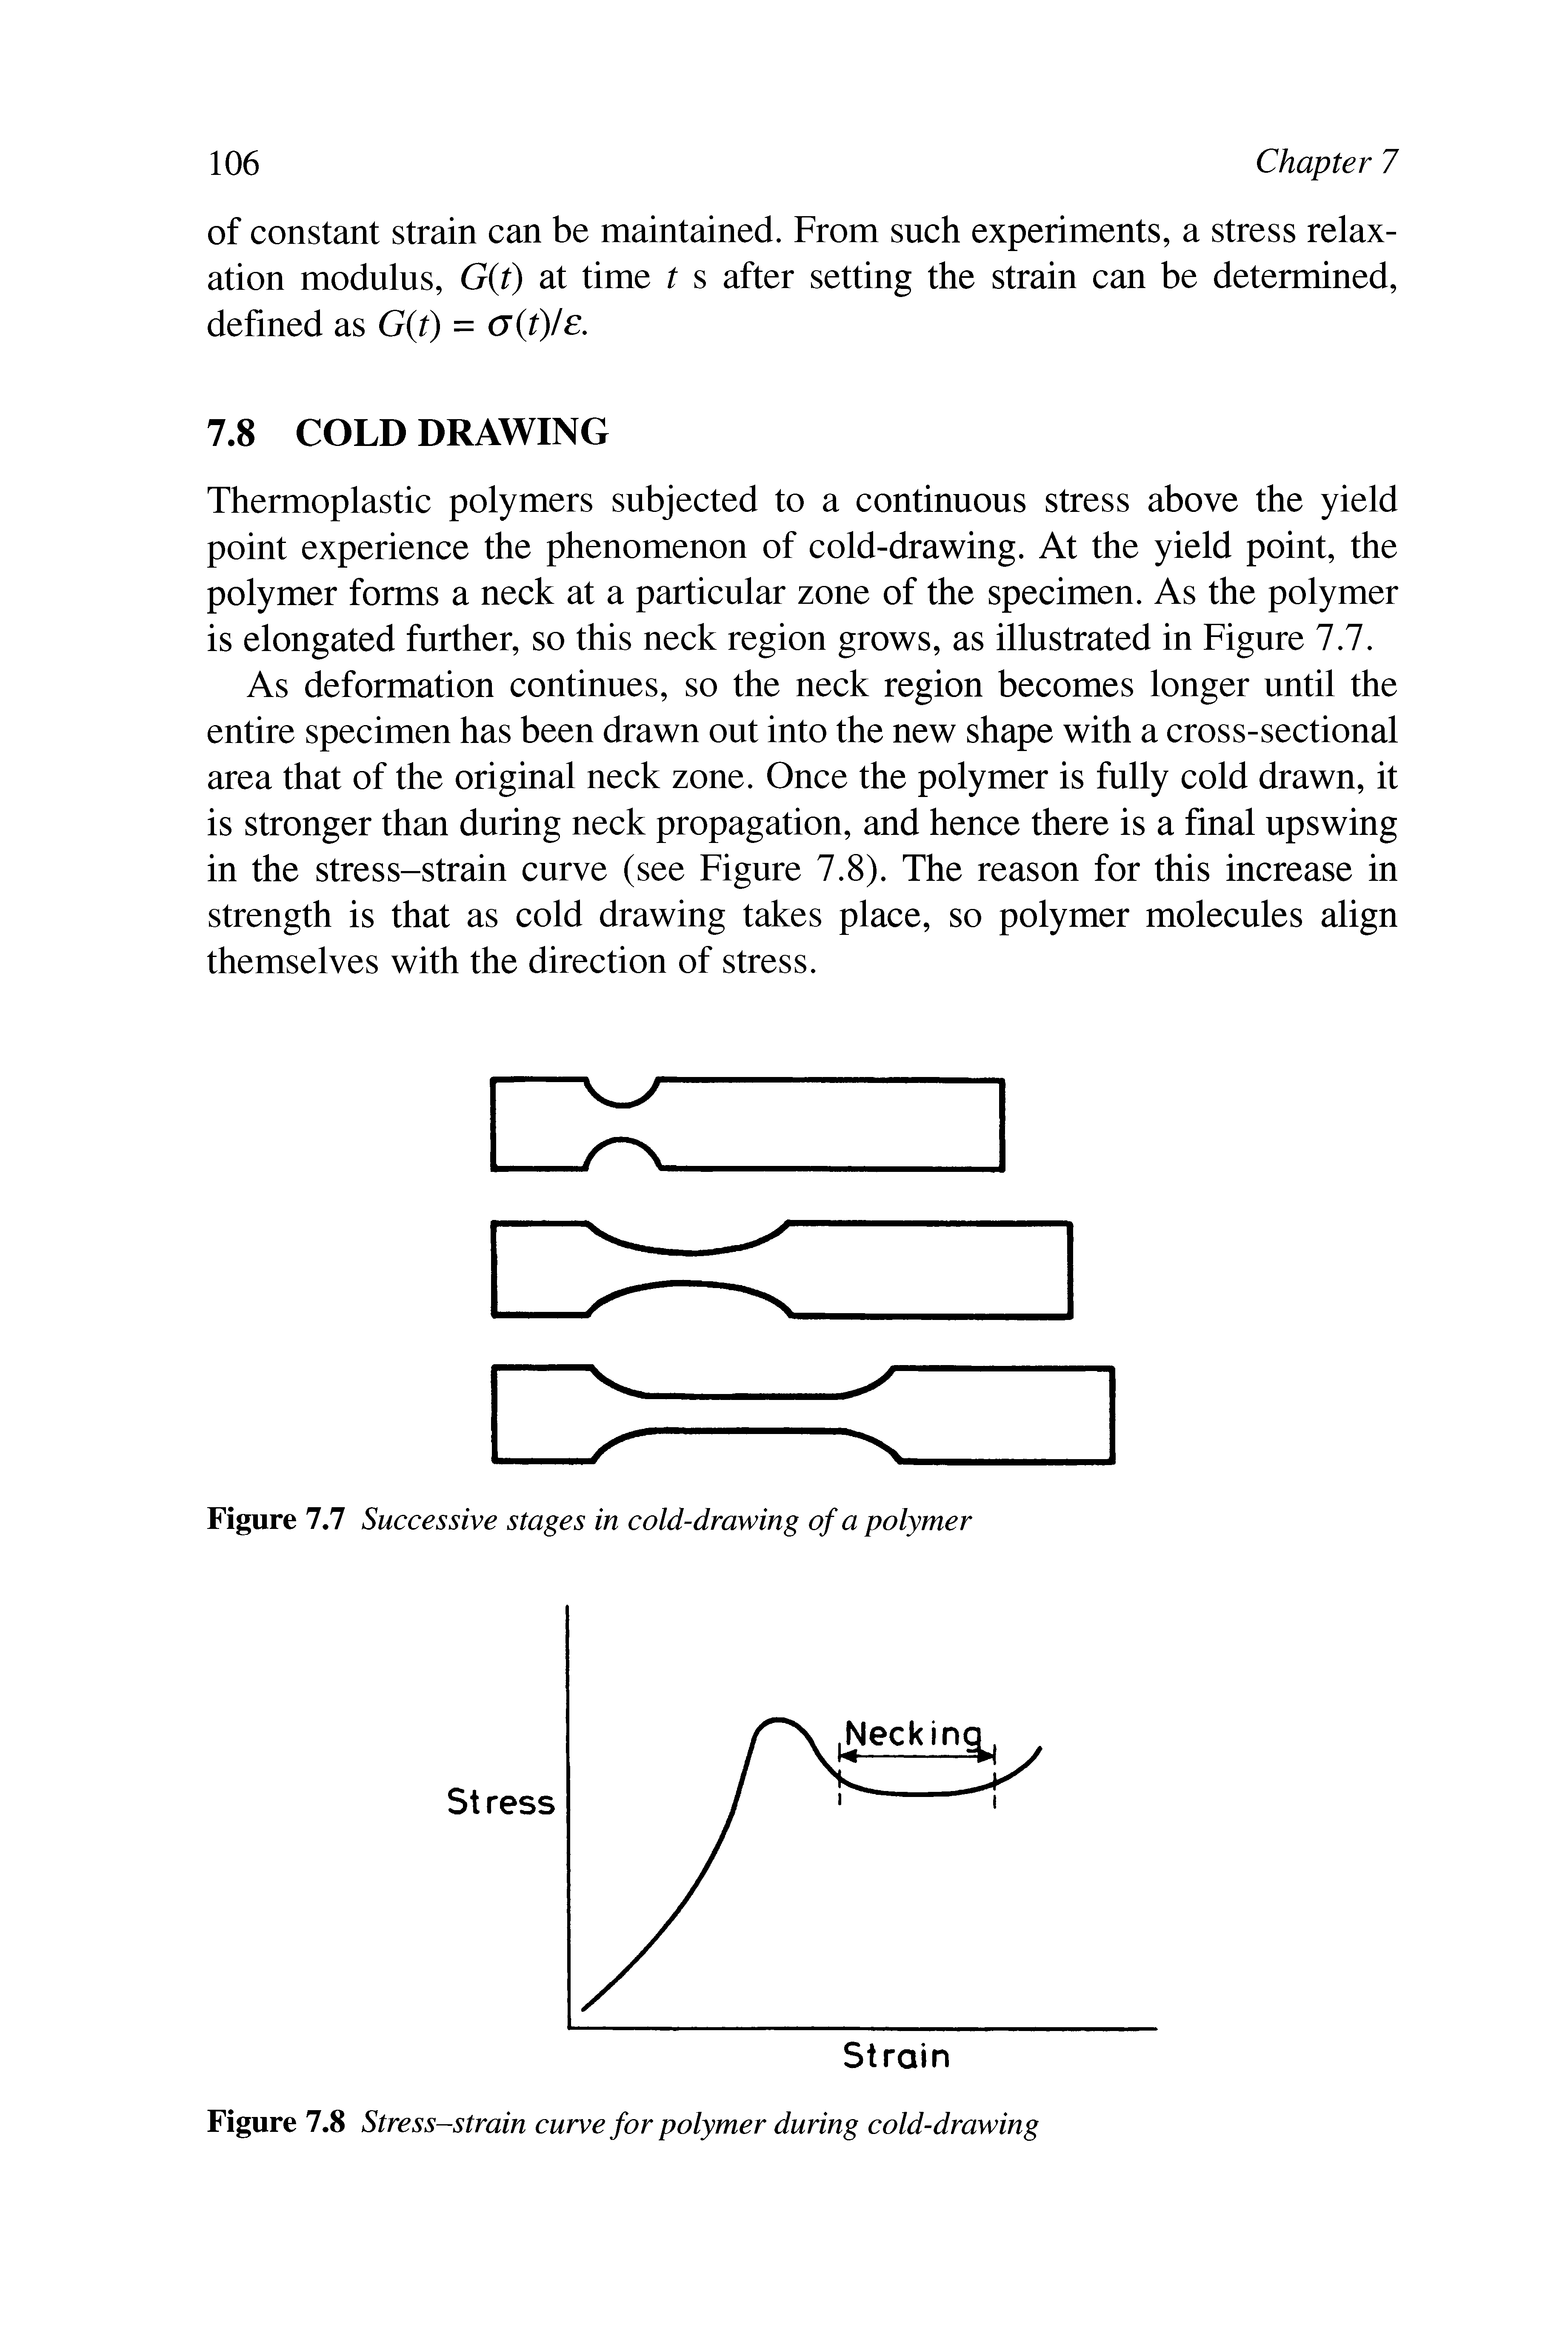 Figure 7.7 Successive stages in cold-drawing of a polymer...